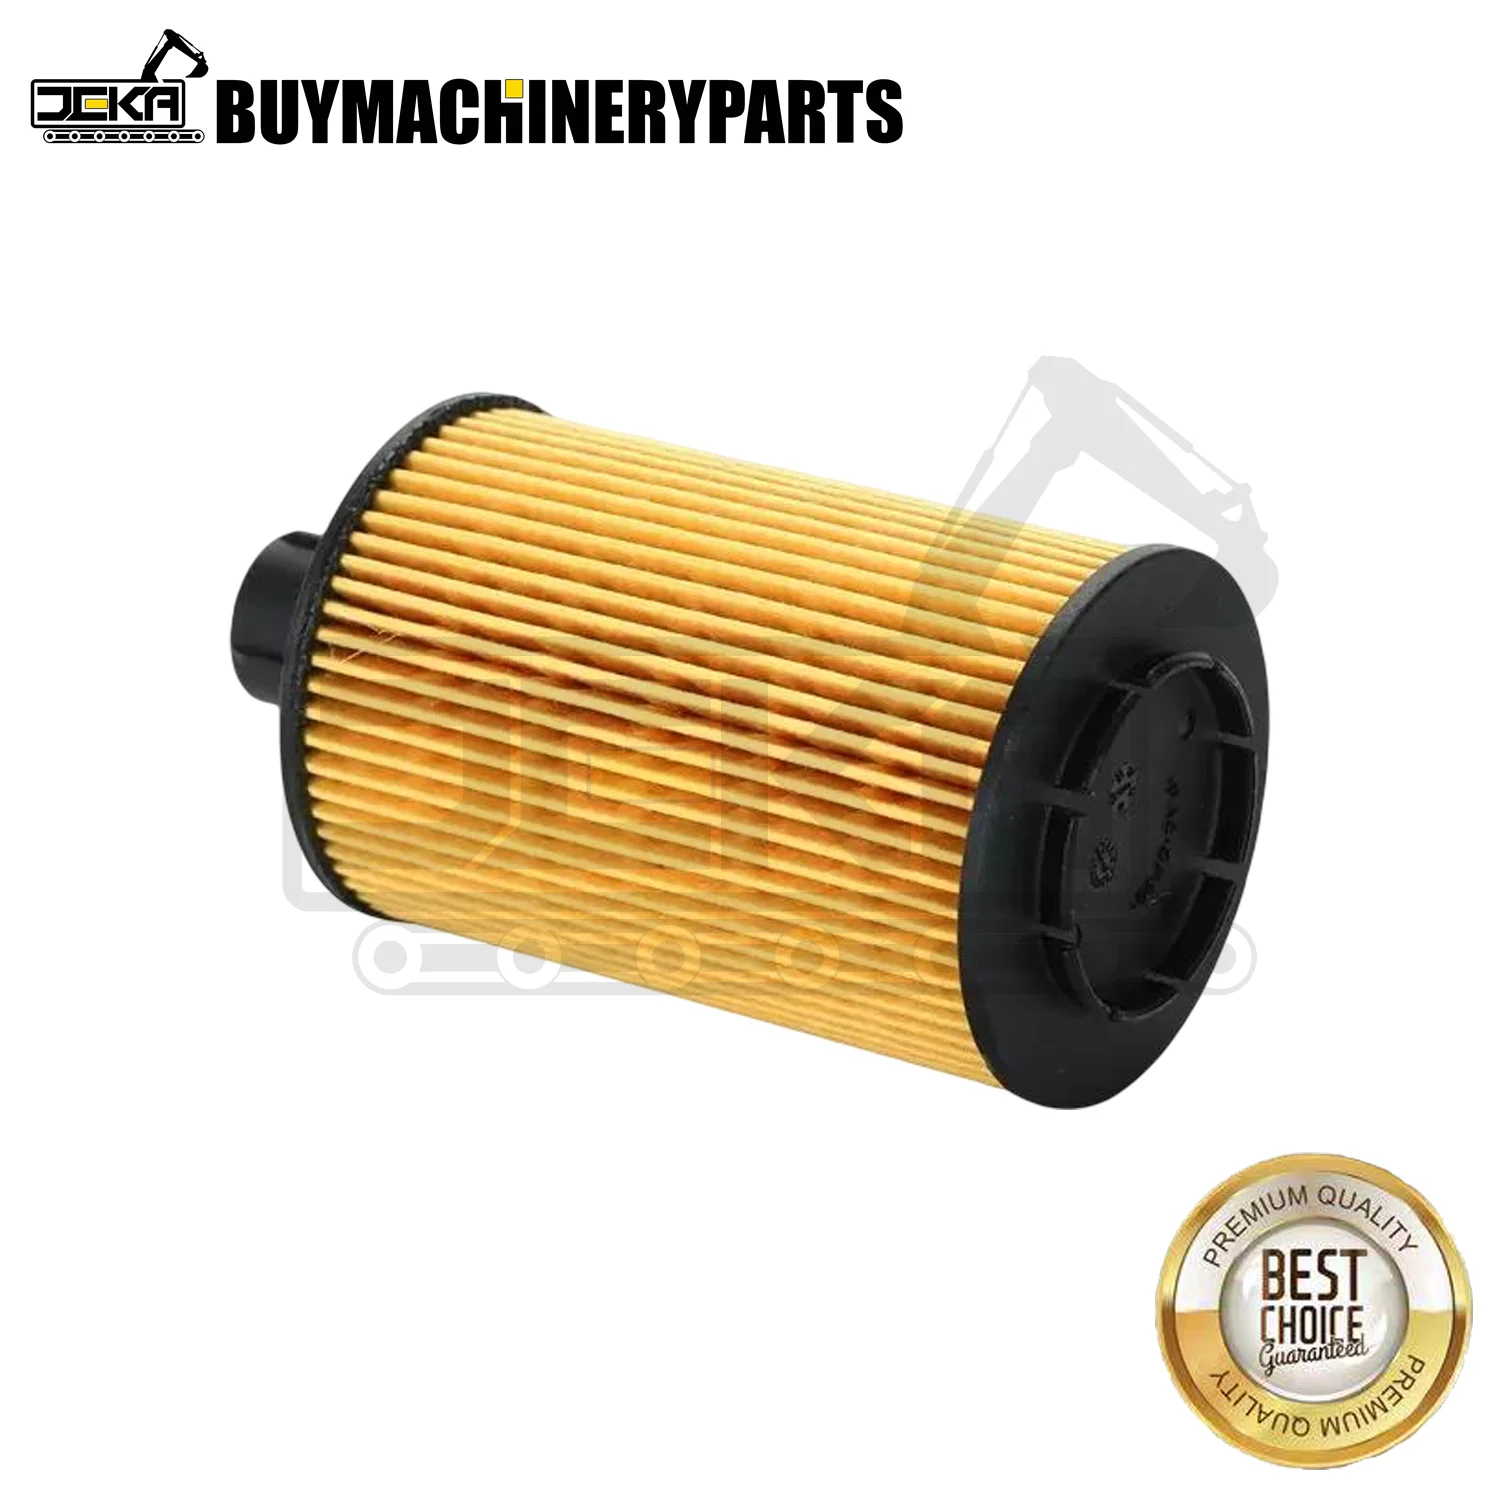 

68229402AA Engine Oil Filter Element Replacement for Ram 3.0L V6 1500 2014-2019 Grand Cherokee 2014-2020 Replaces 68109834AA